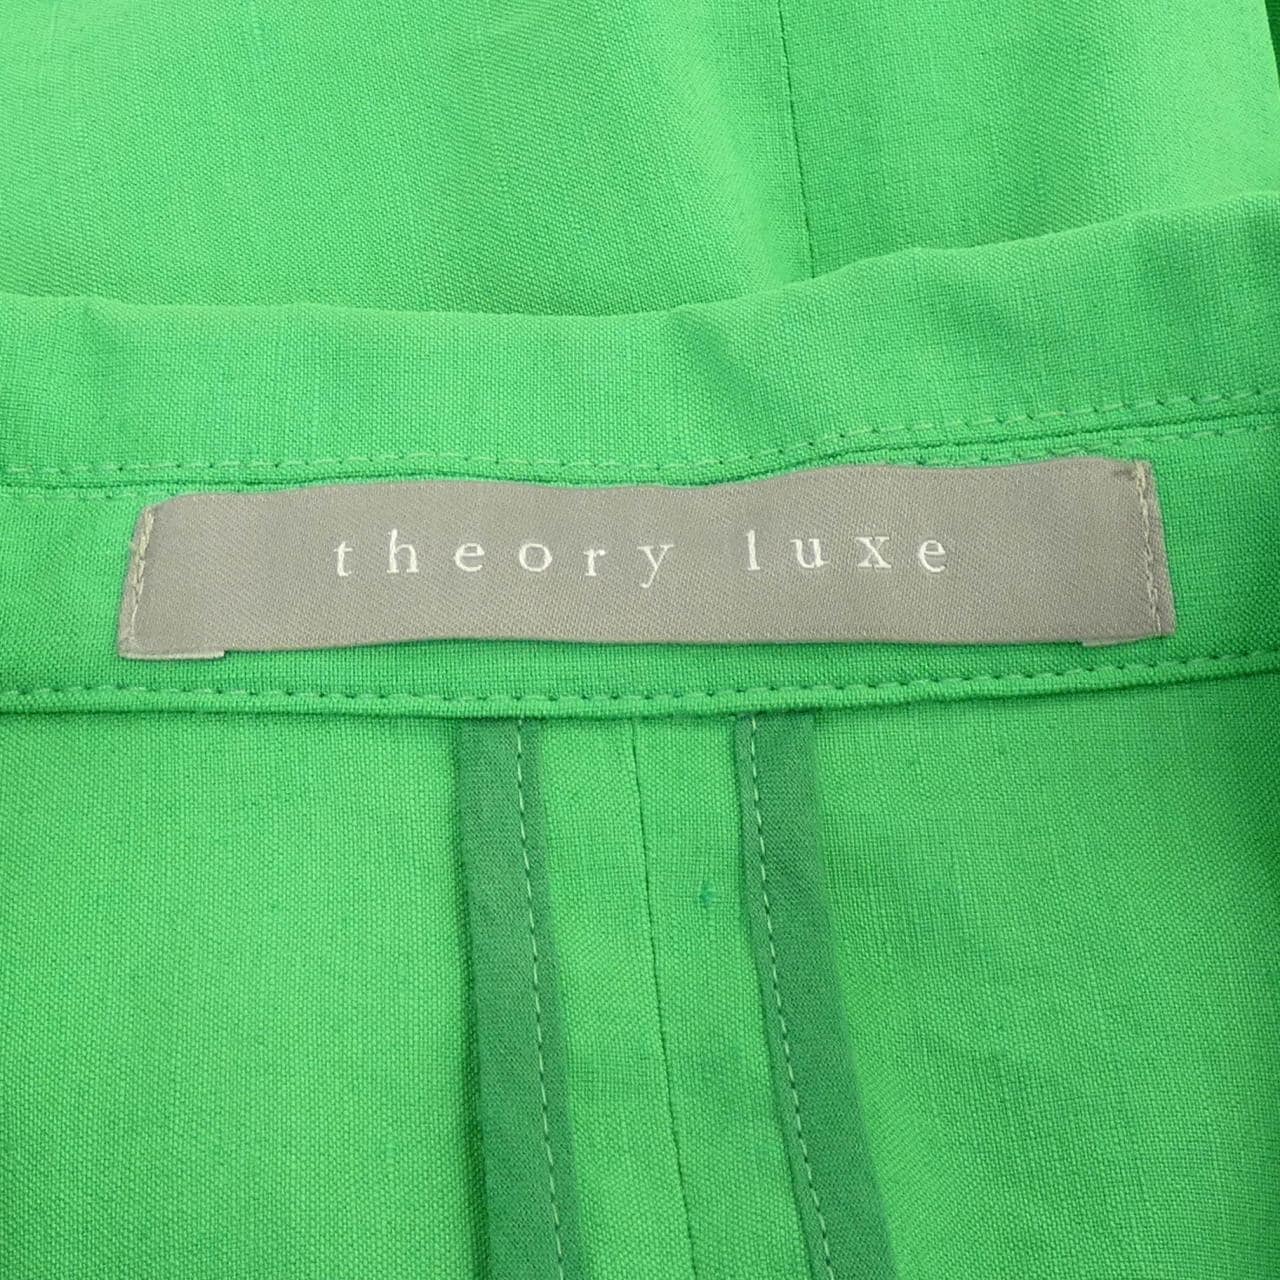 Theory luxe jacket